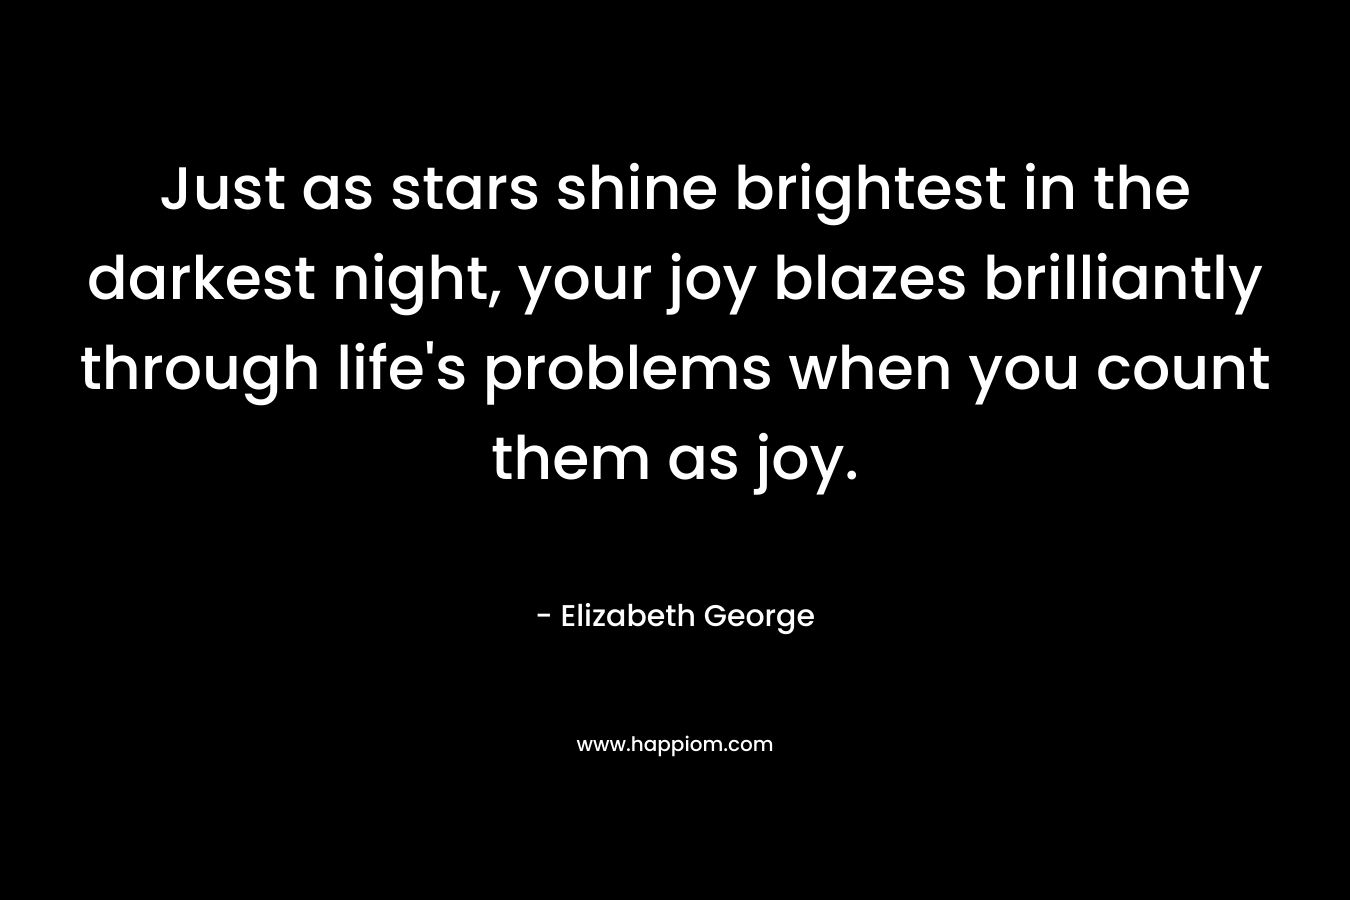 Just as stars shine brightest in the darkest night, your joy blazes brilliantly through life's problems when you count them as joy.